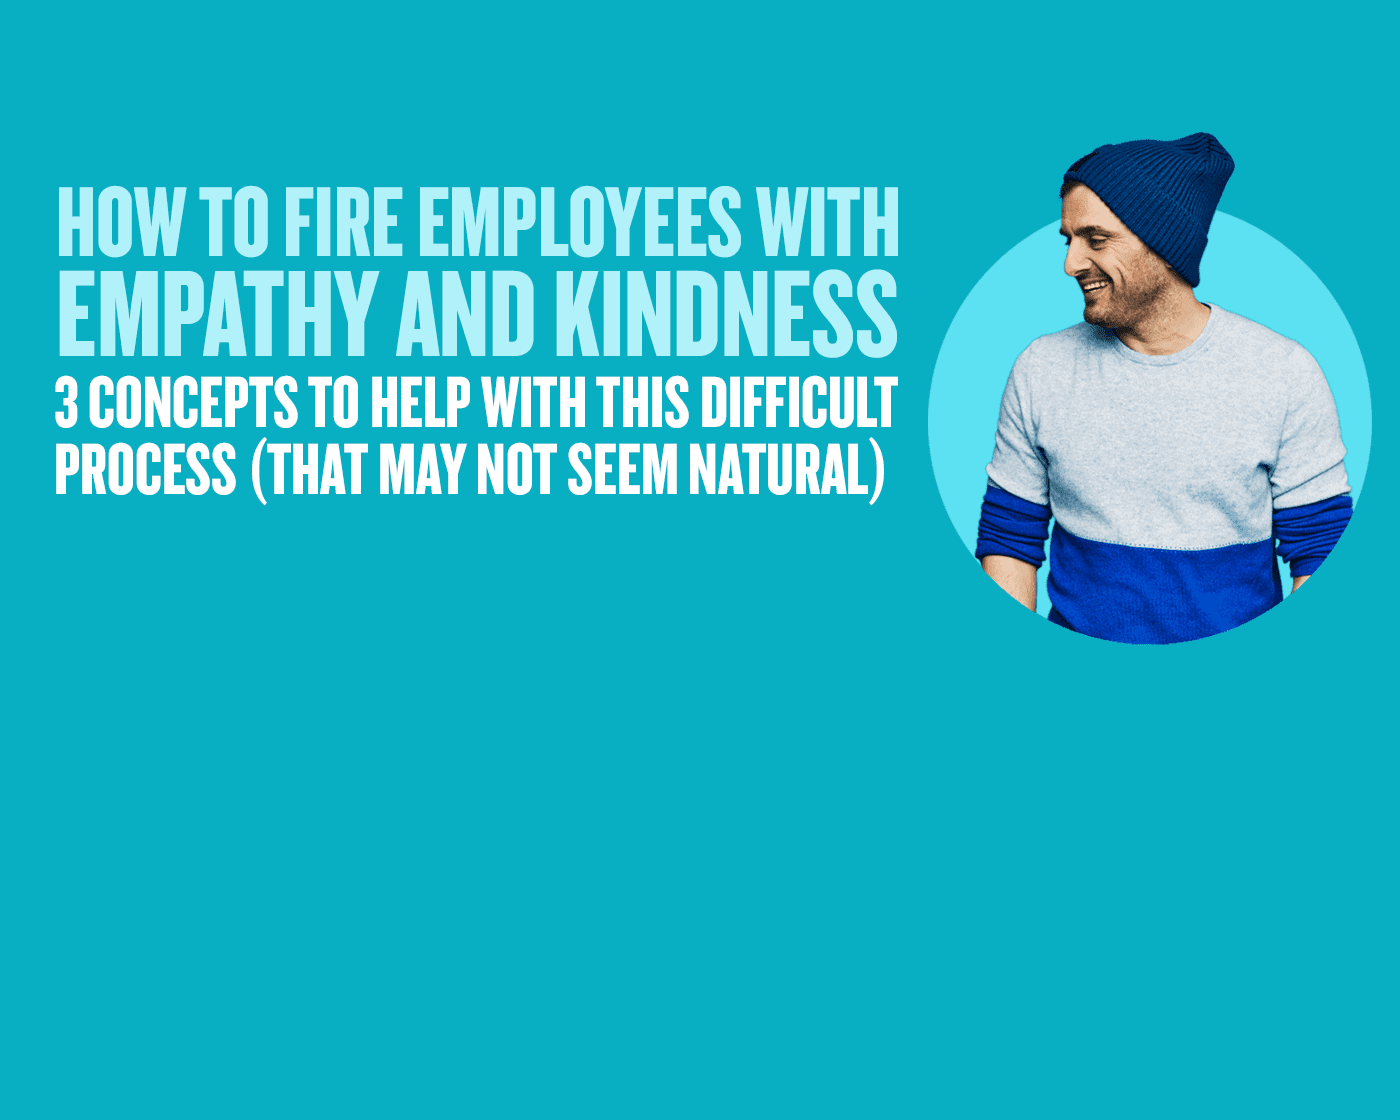 How to Fire Employees With Empathy and Kindness